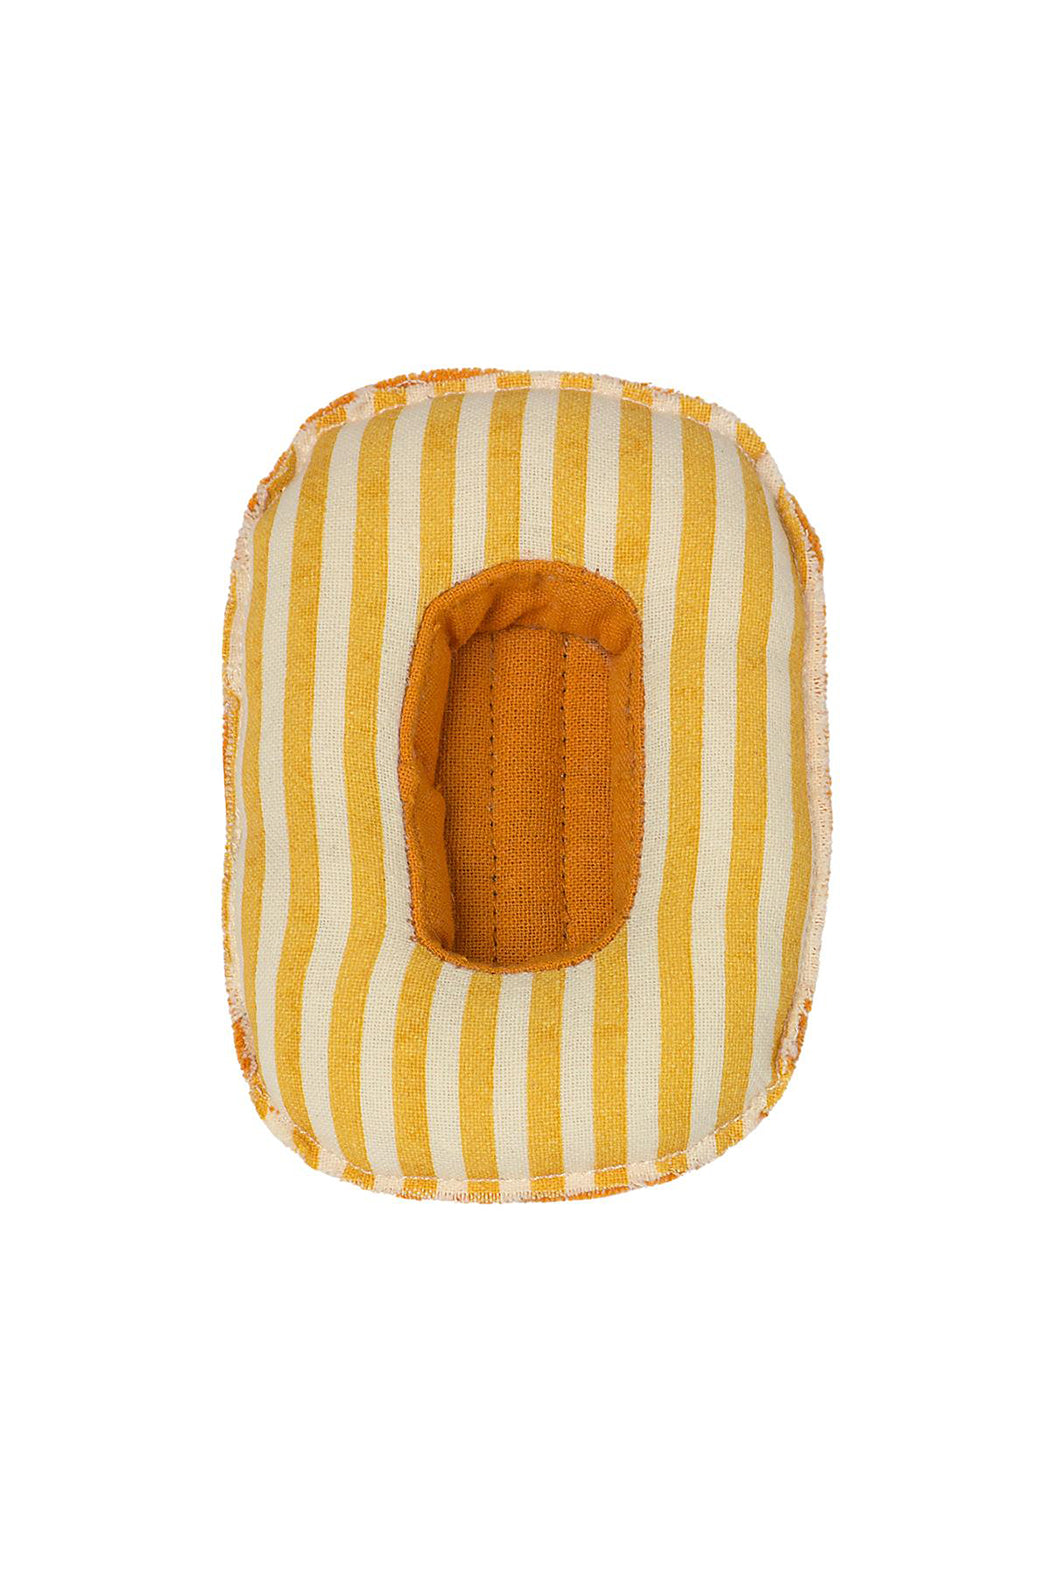 Maileg Rubber Boat - Small Mouse/Yellow Stripe